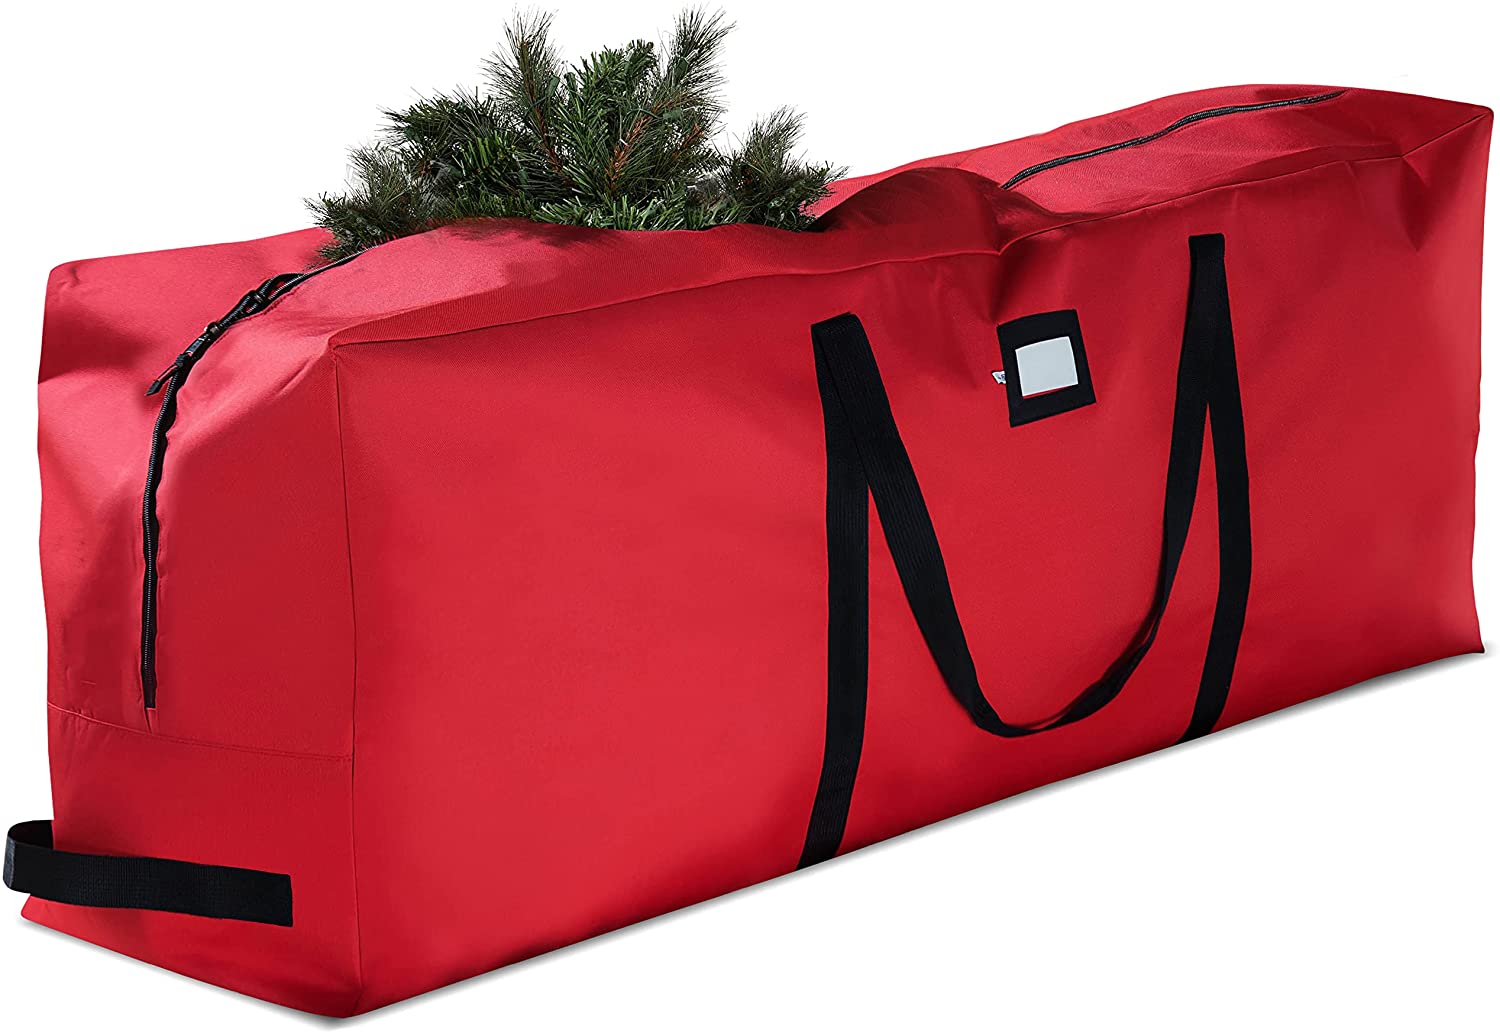 Expensive Options Available under Christmas tree Storage Bags